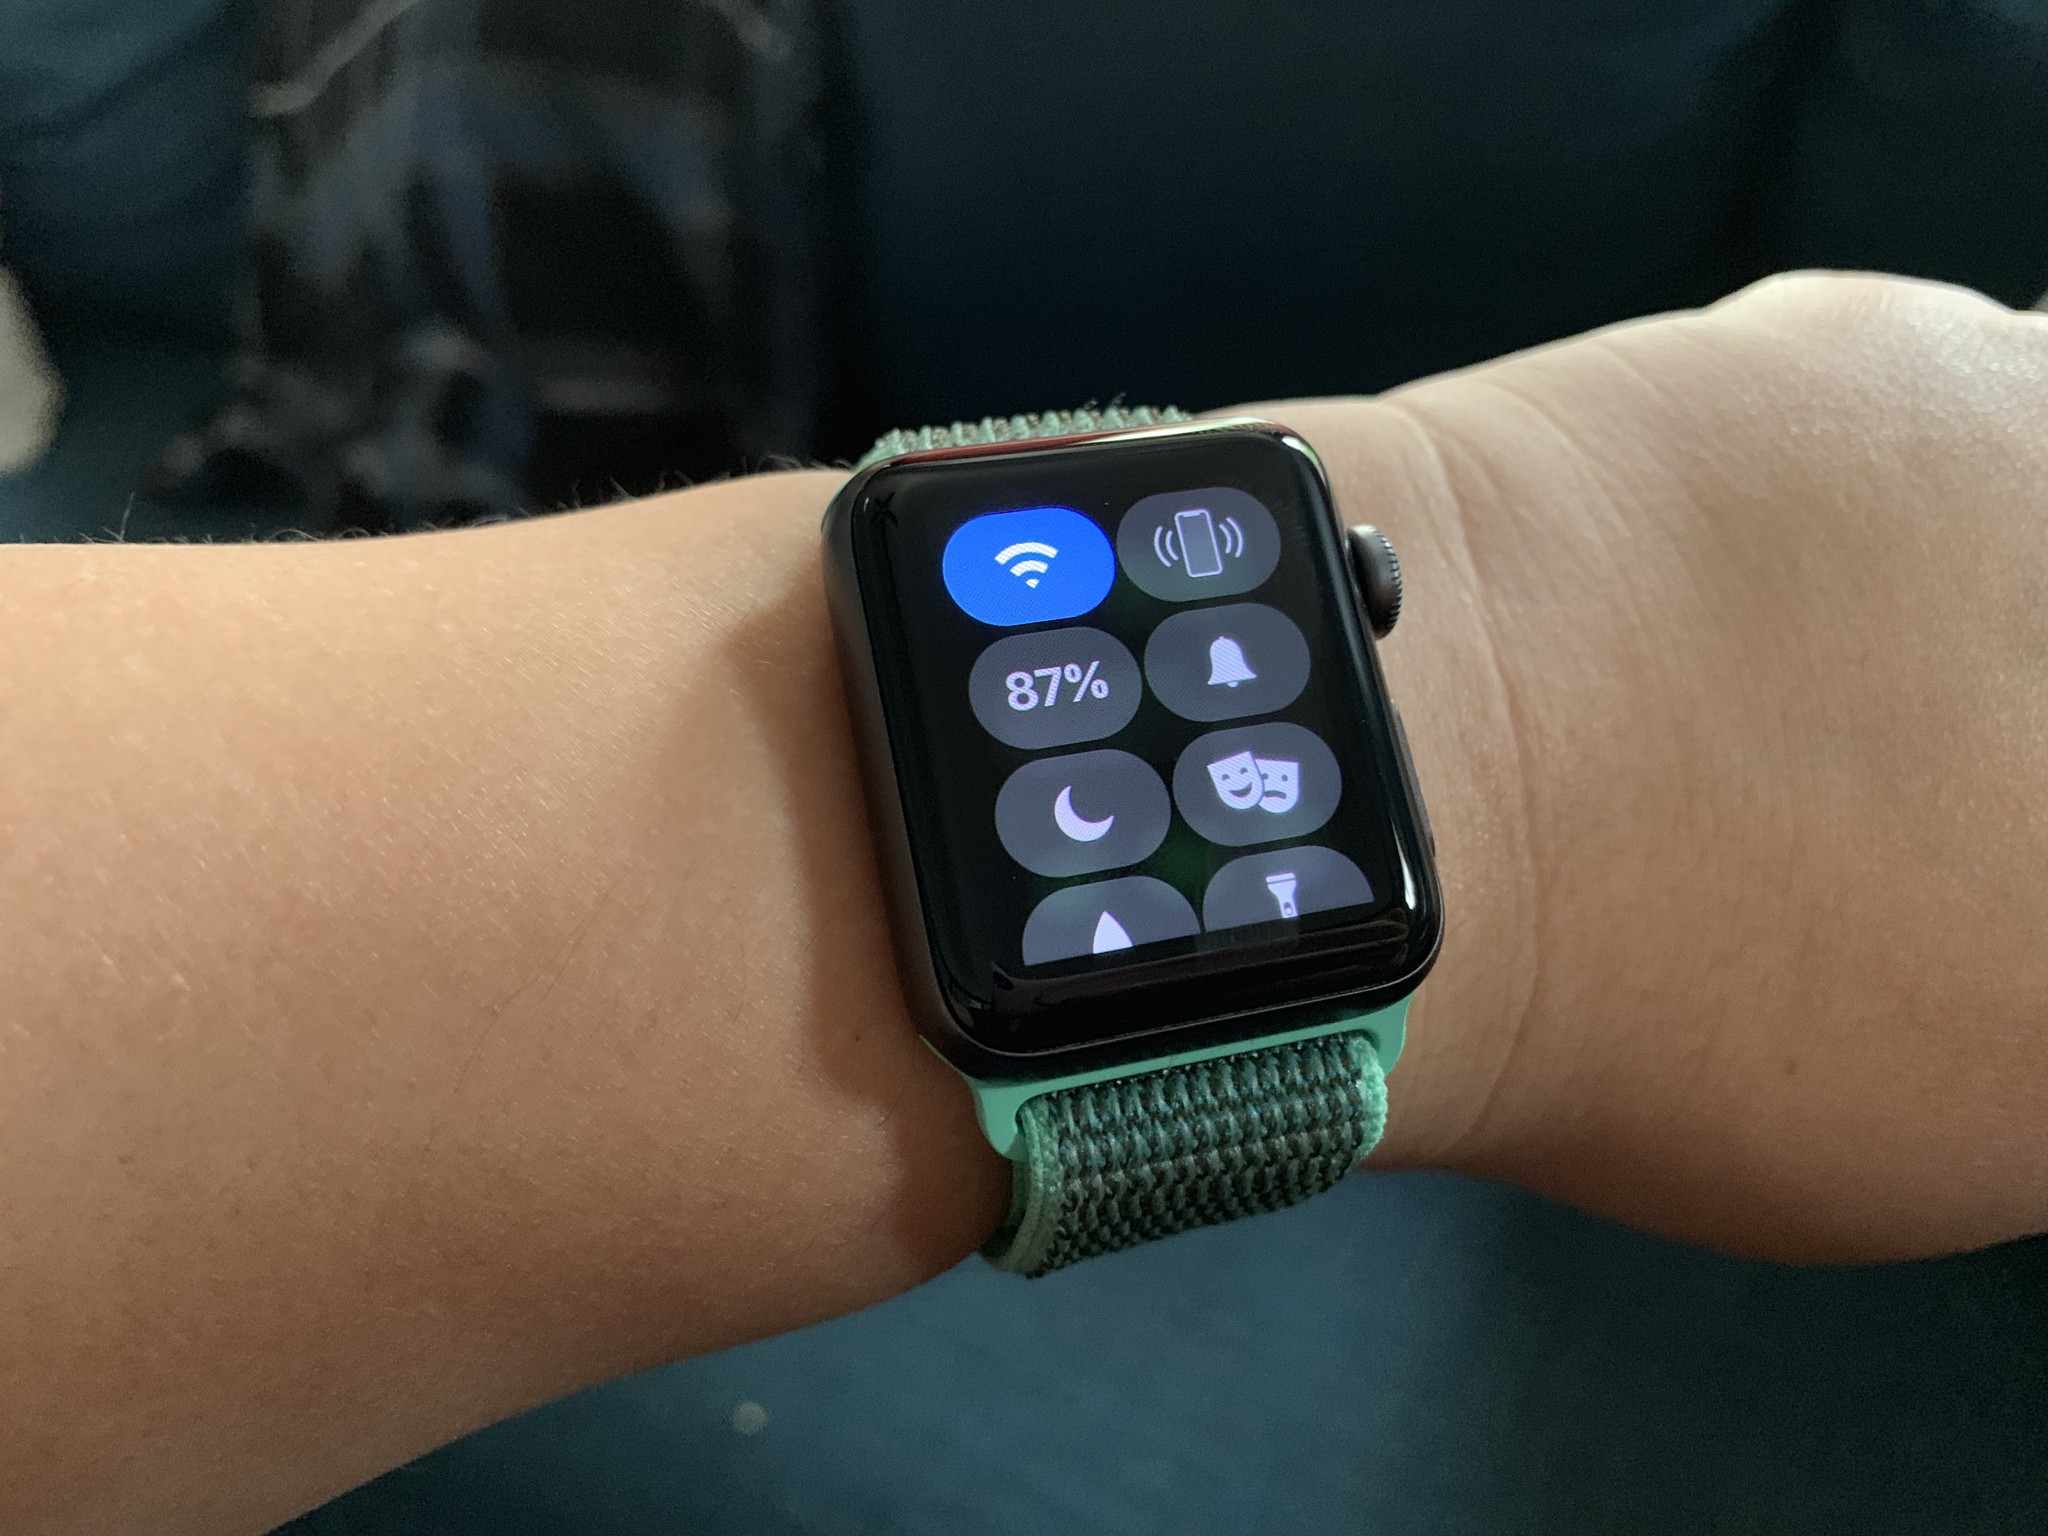 Apple Watch series 3 with Wi-Fi Control Center